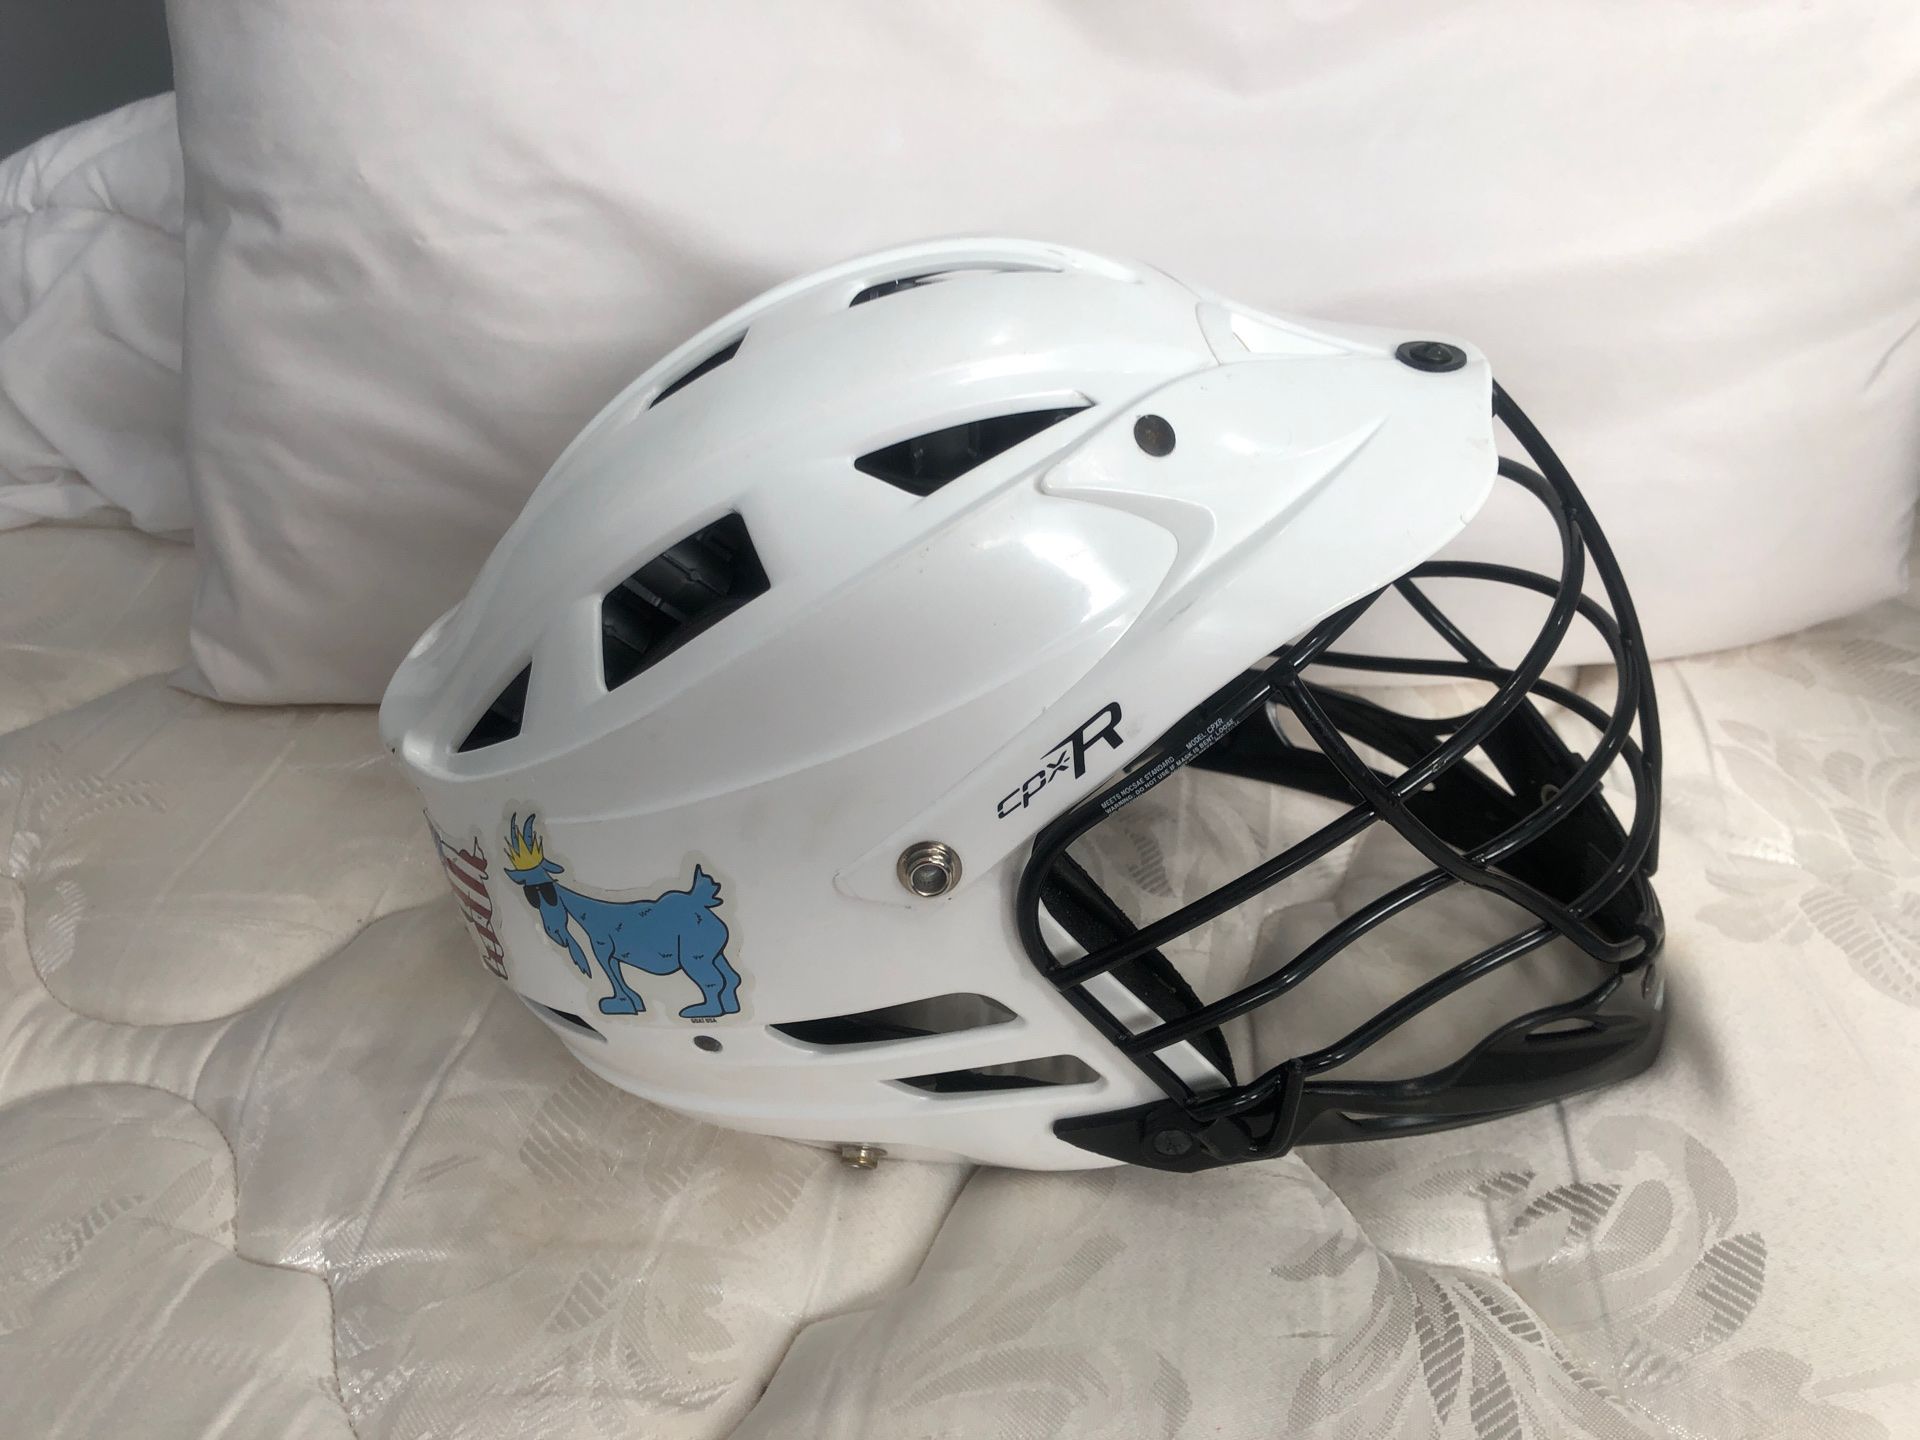 CPXR Lacrosse Youth Helmet - Good Condition